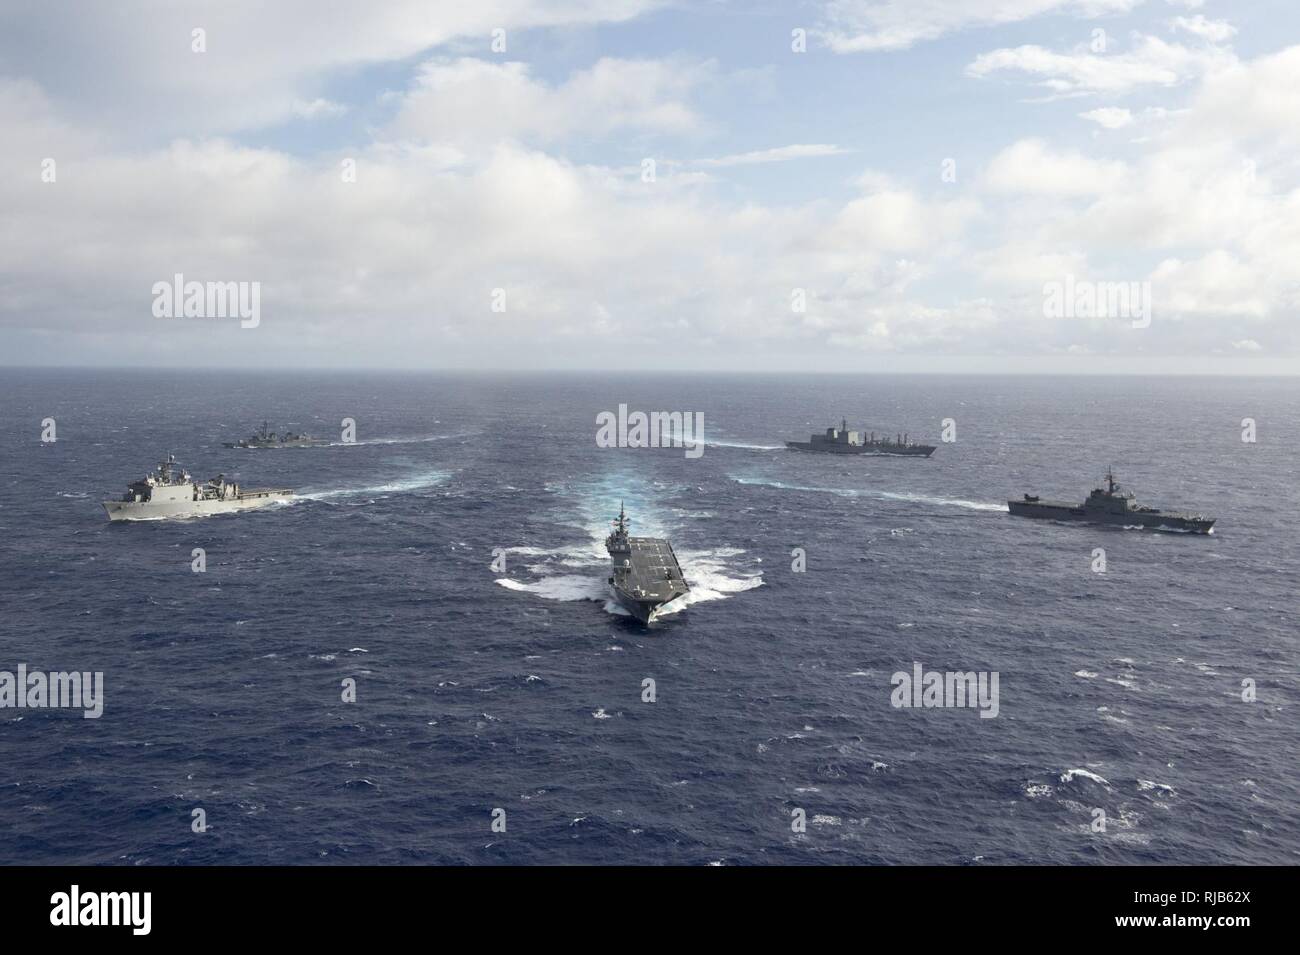 PACIFIC OCEAN (Nov. 6, 2016) - Ships participating in Keen Sword 2017 steam in formation during a photo exercise. Keen Sword 17 is a joint and bilateral field training exercise (FTX) between U.S. and Japanese forces meant to increase readiness and interoperability within the framework of the U.S. – Japan alliance. Stock Photo